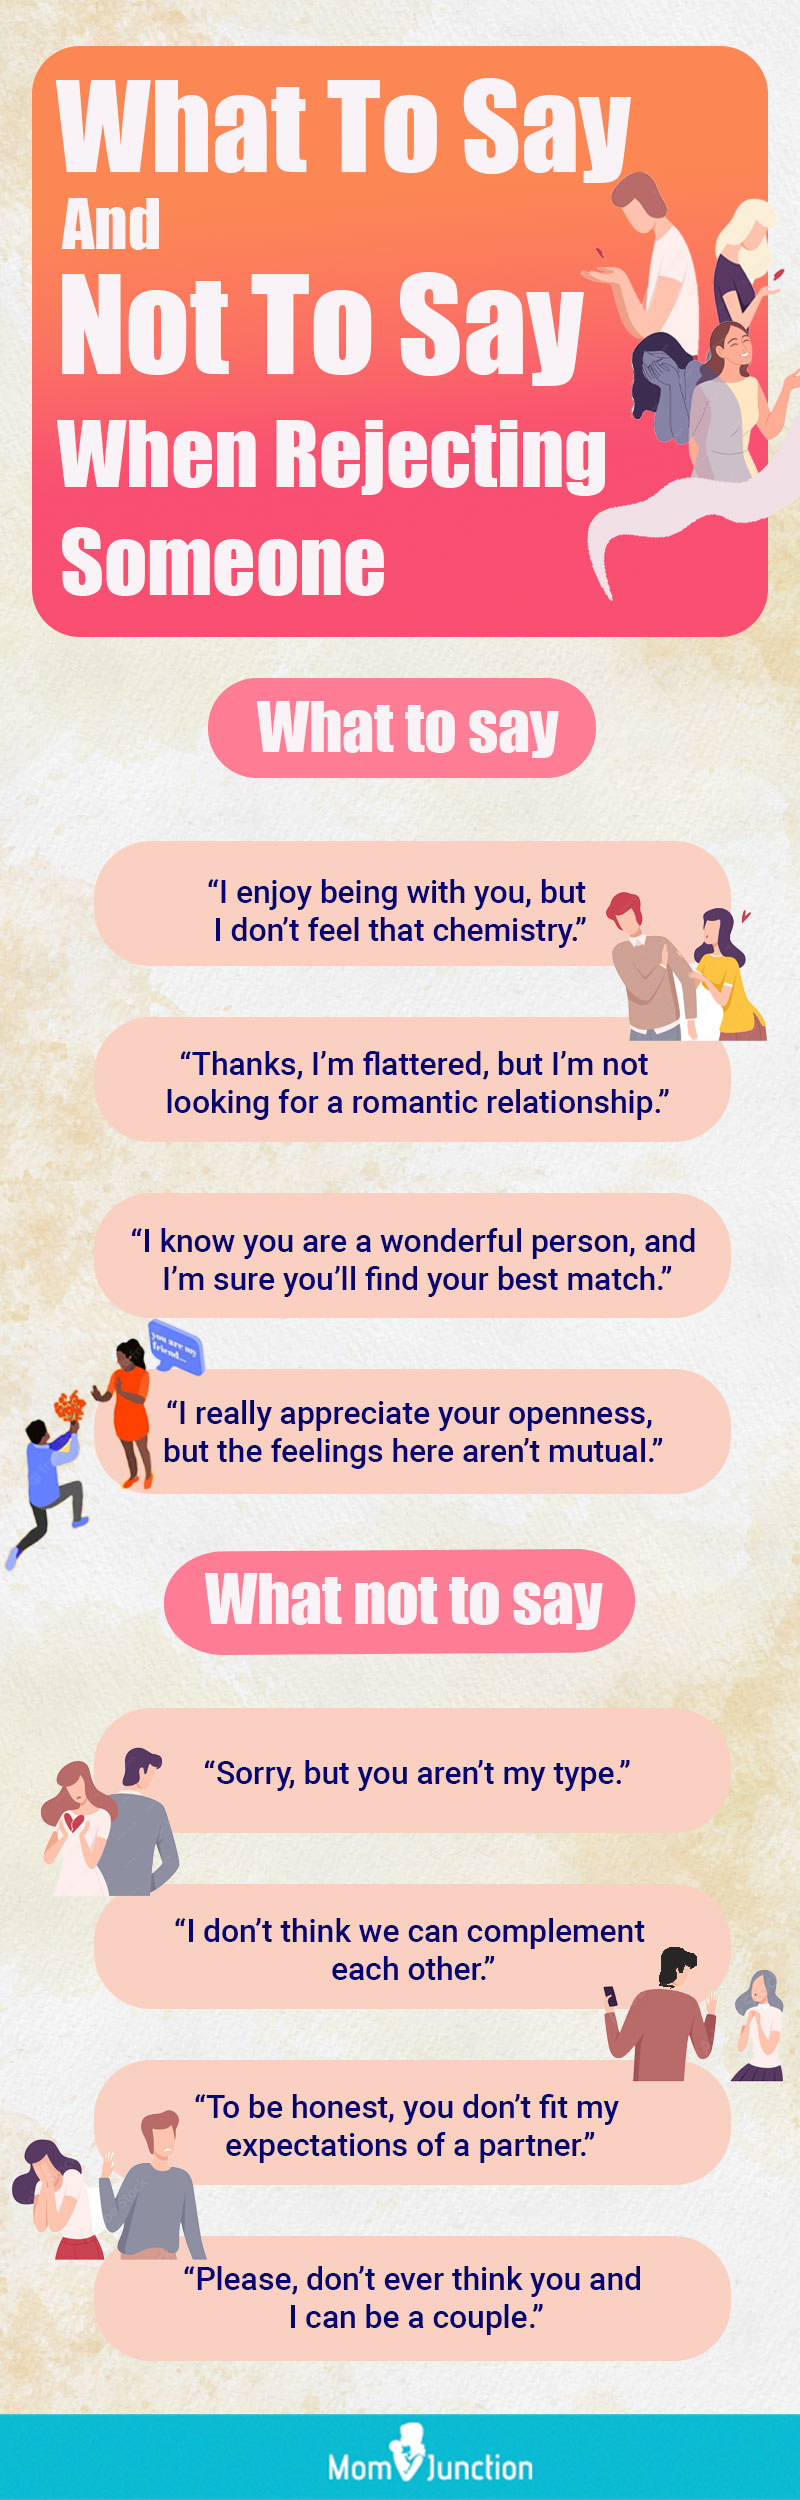 ways of rejecting someone with respect (infographic)